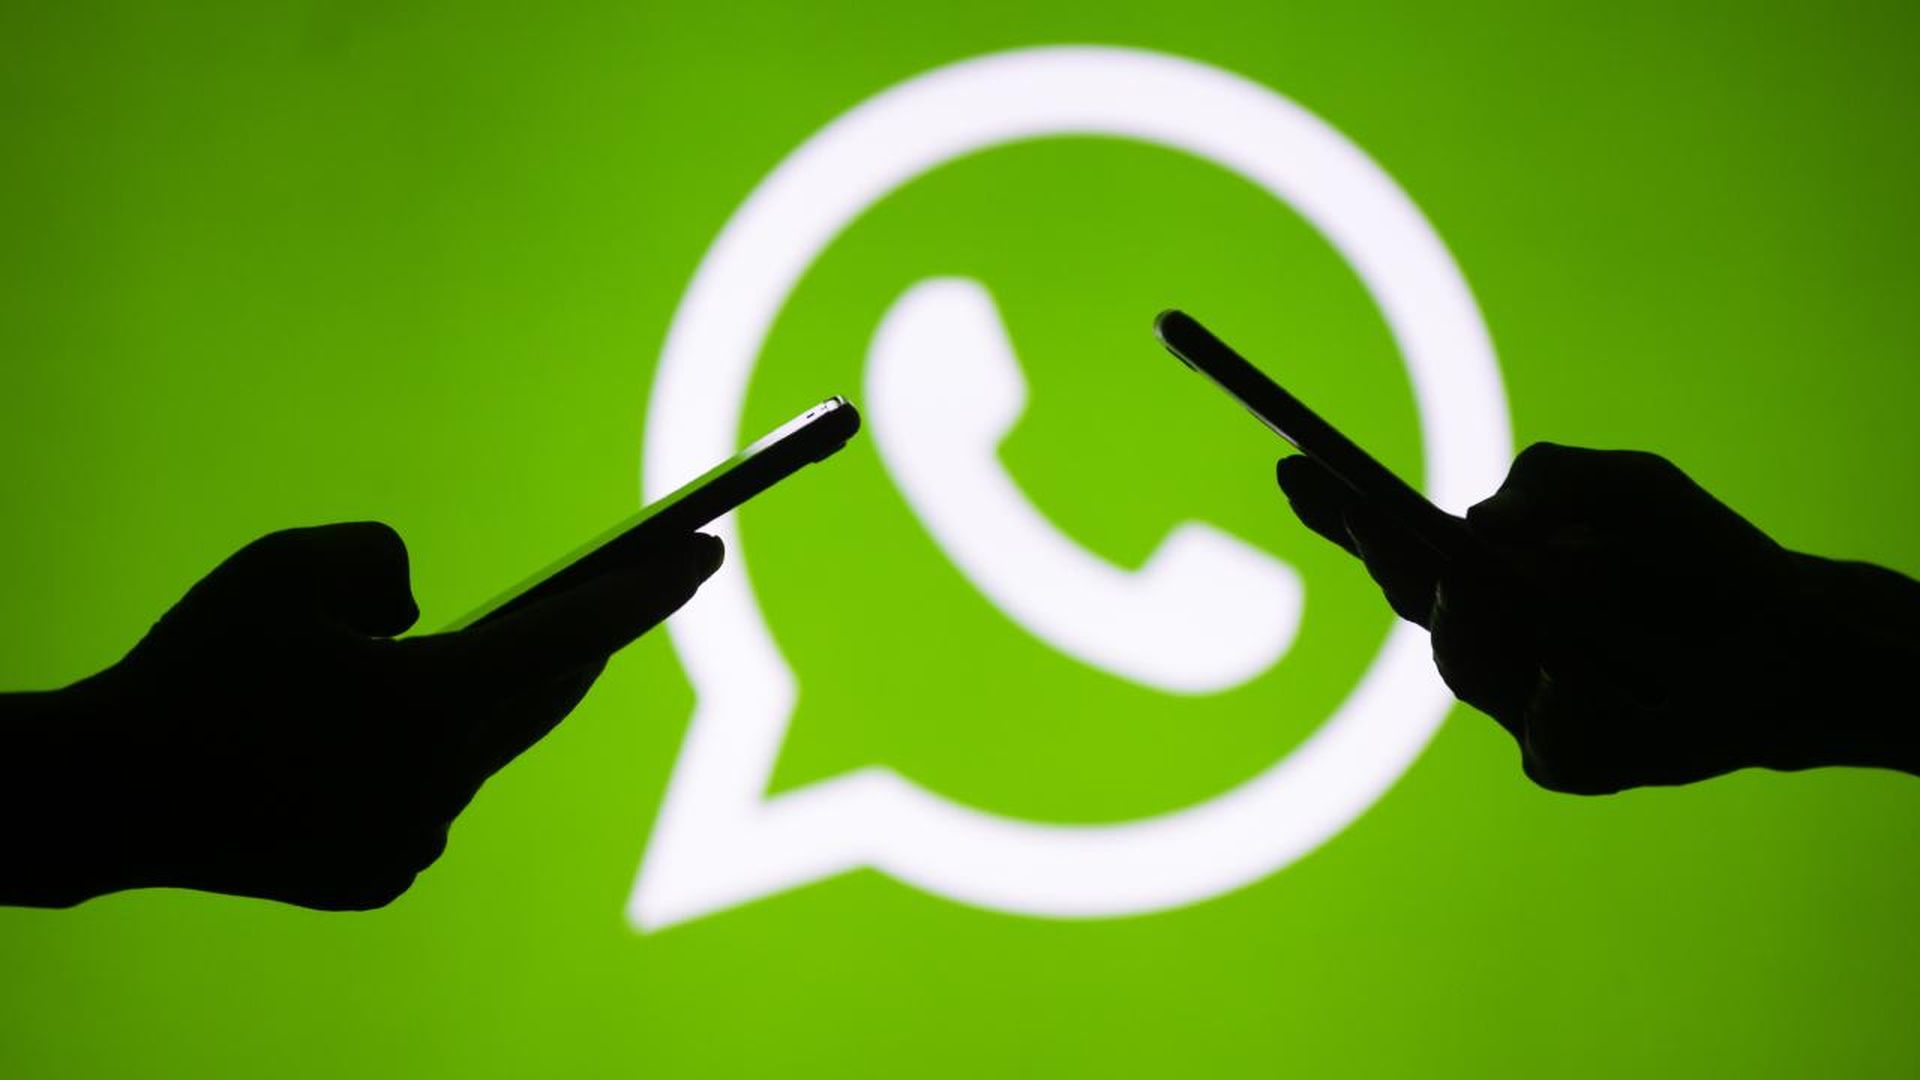 In this article, we are going to be covering WhatsApp not working: How to fix WhatsApp messages not sending, so you can keep messaging your friends and loved ones.